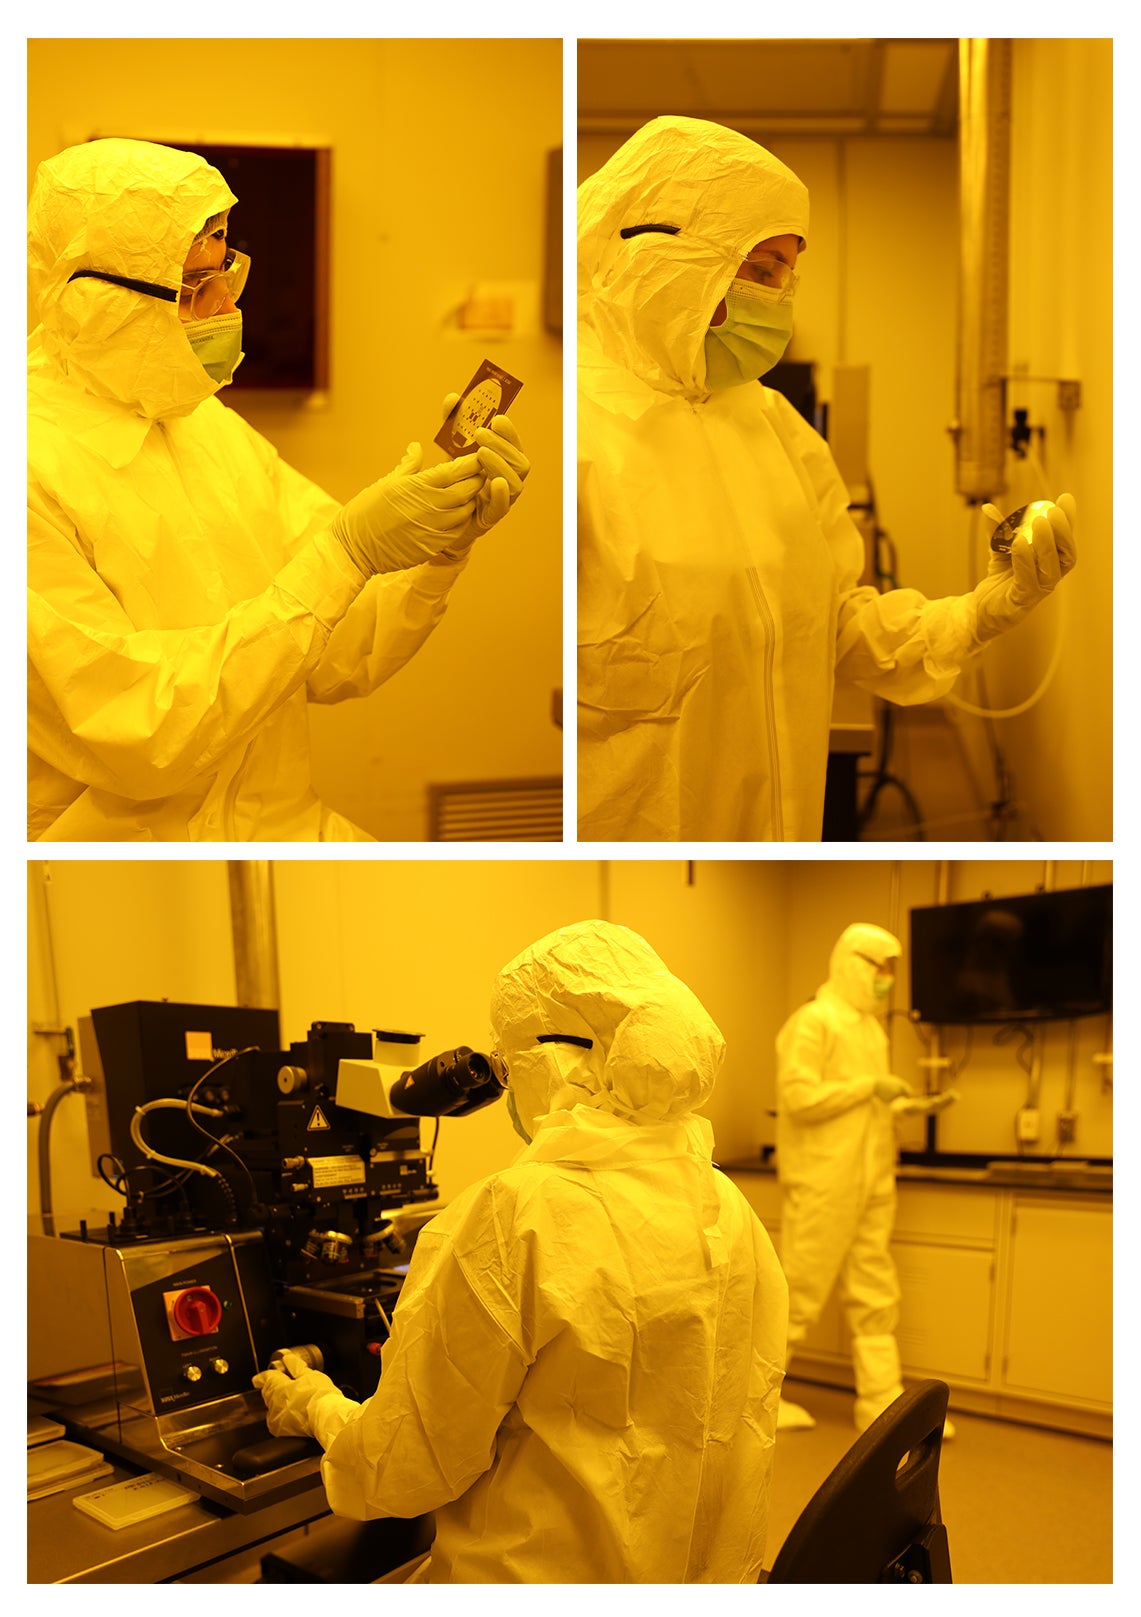 Technicians working in the cleanroom with protective gear on.